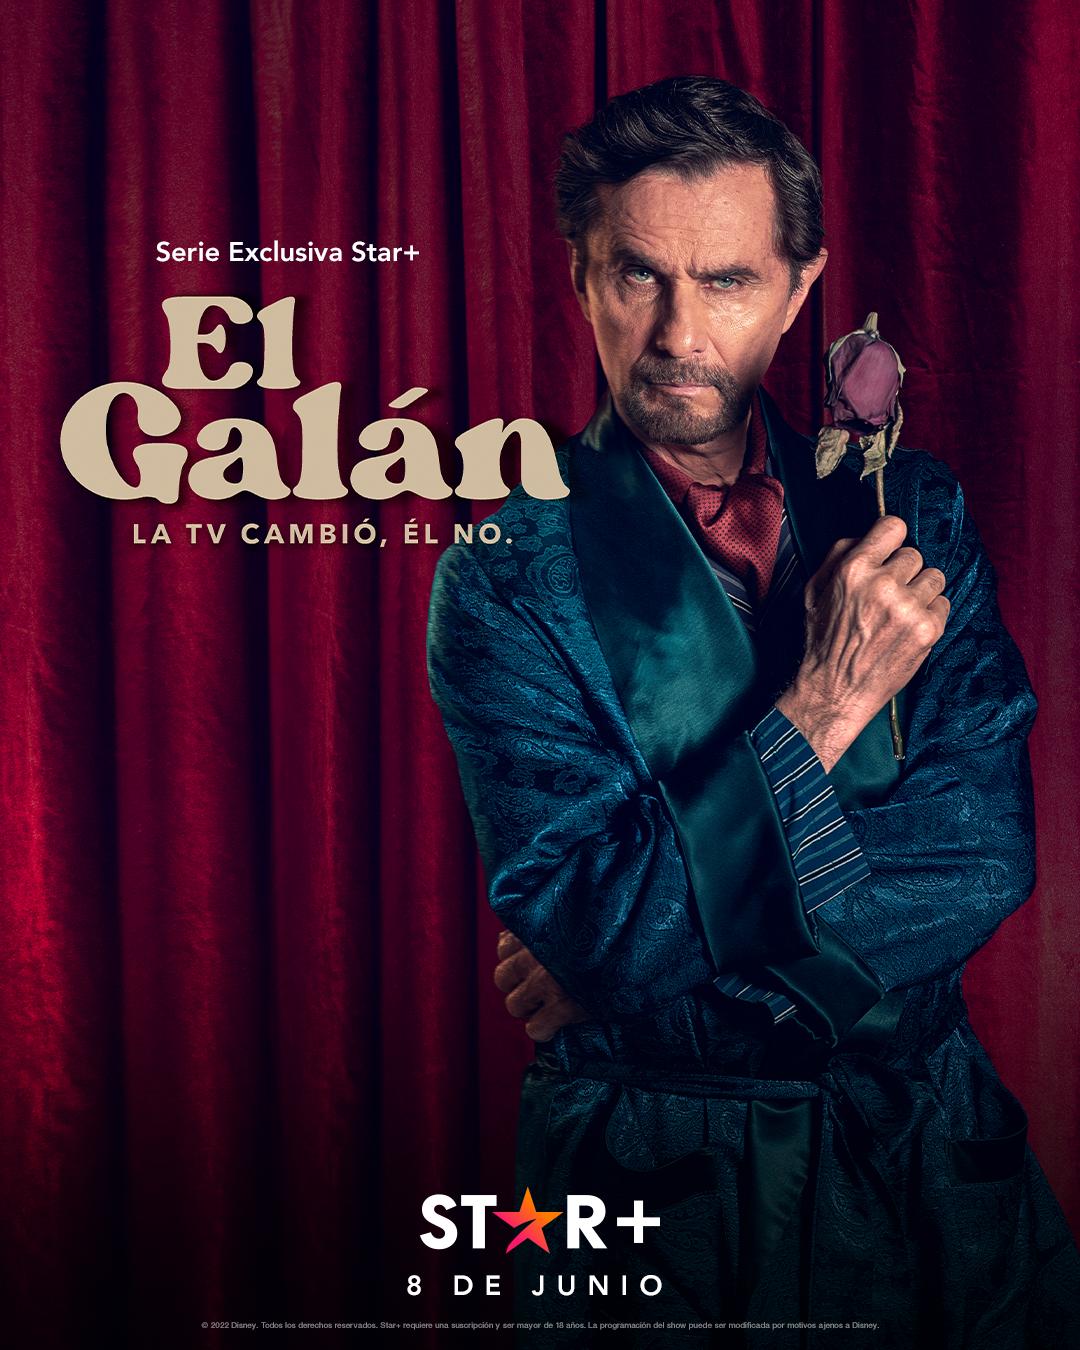 TV ratings for The Gallant. TV Changed, He Didn't (El Galán. La Tv Cambió, Él No) in South Africa. Star+ TV series